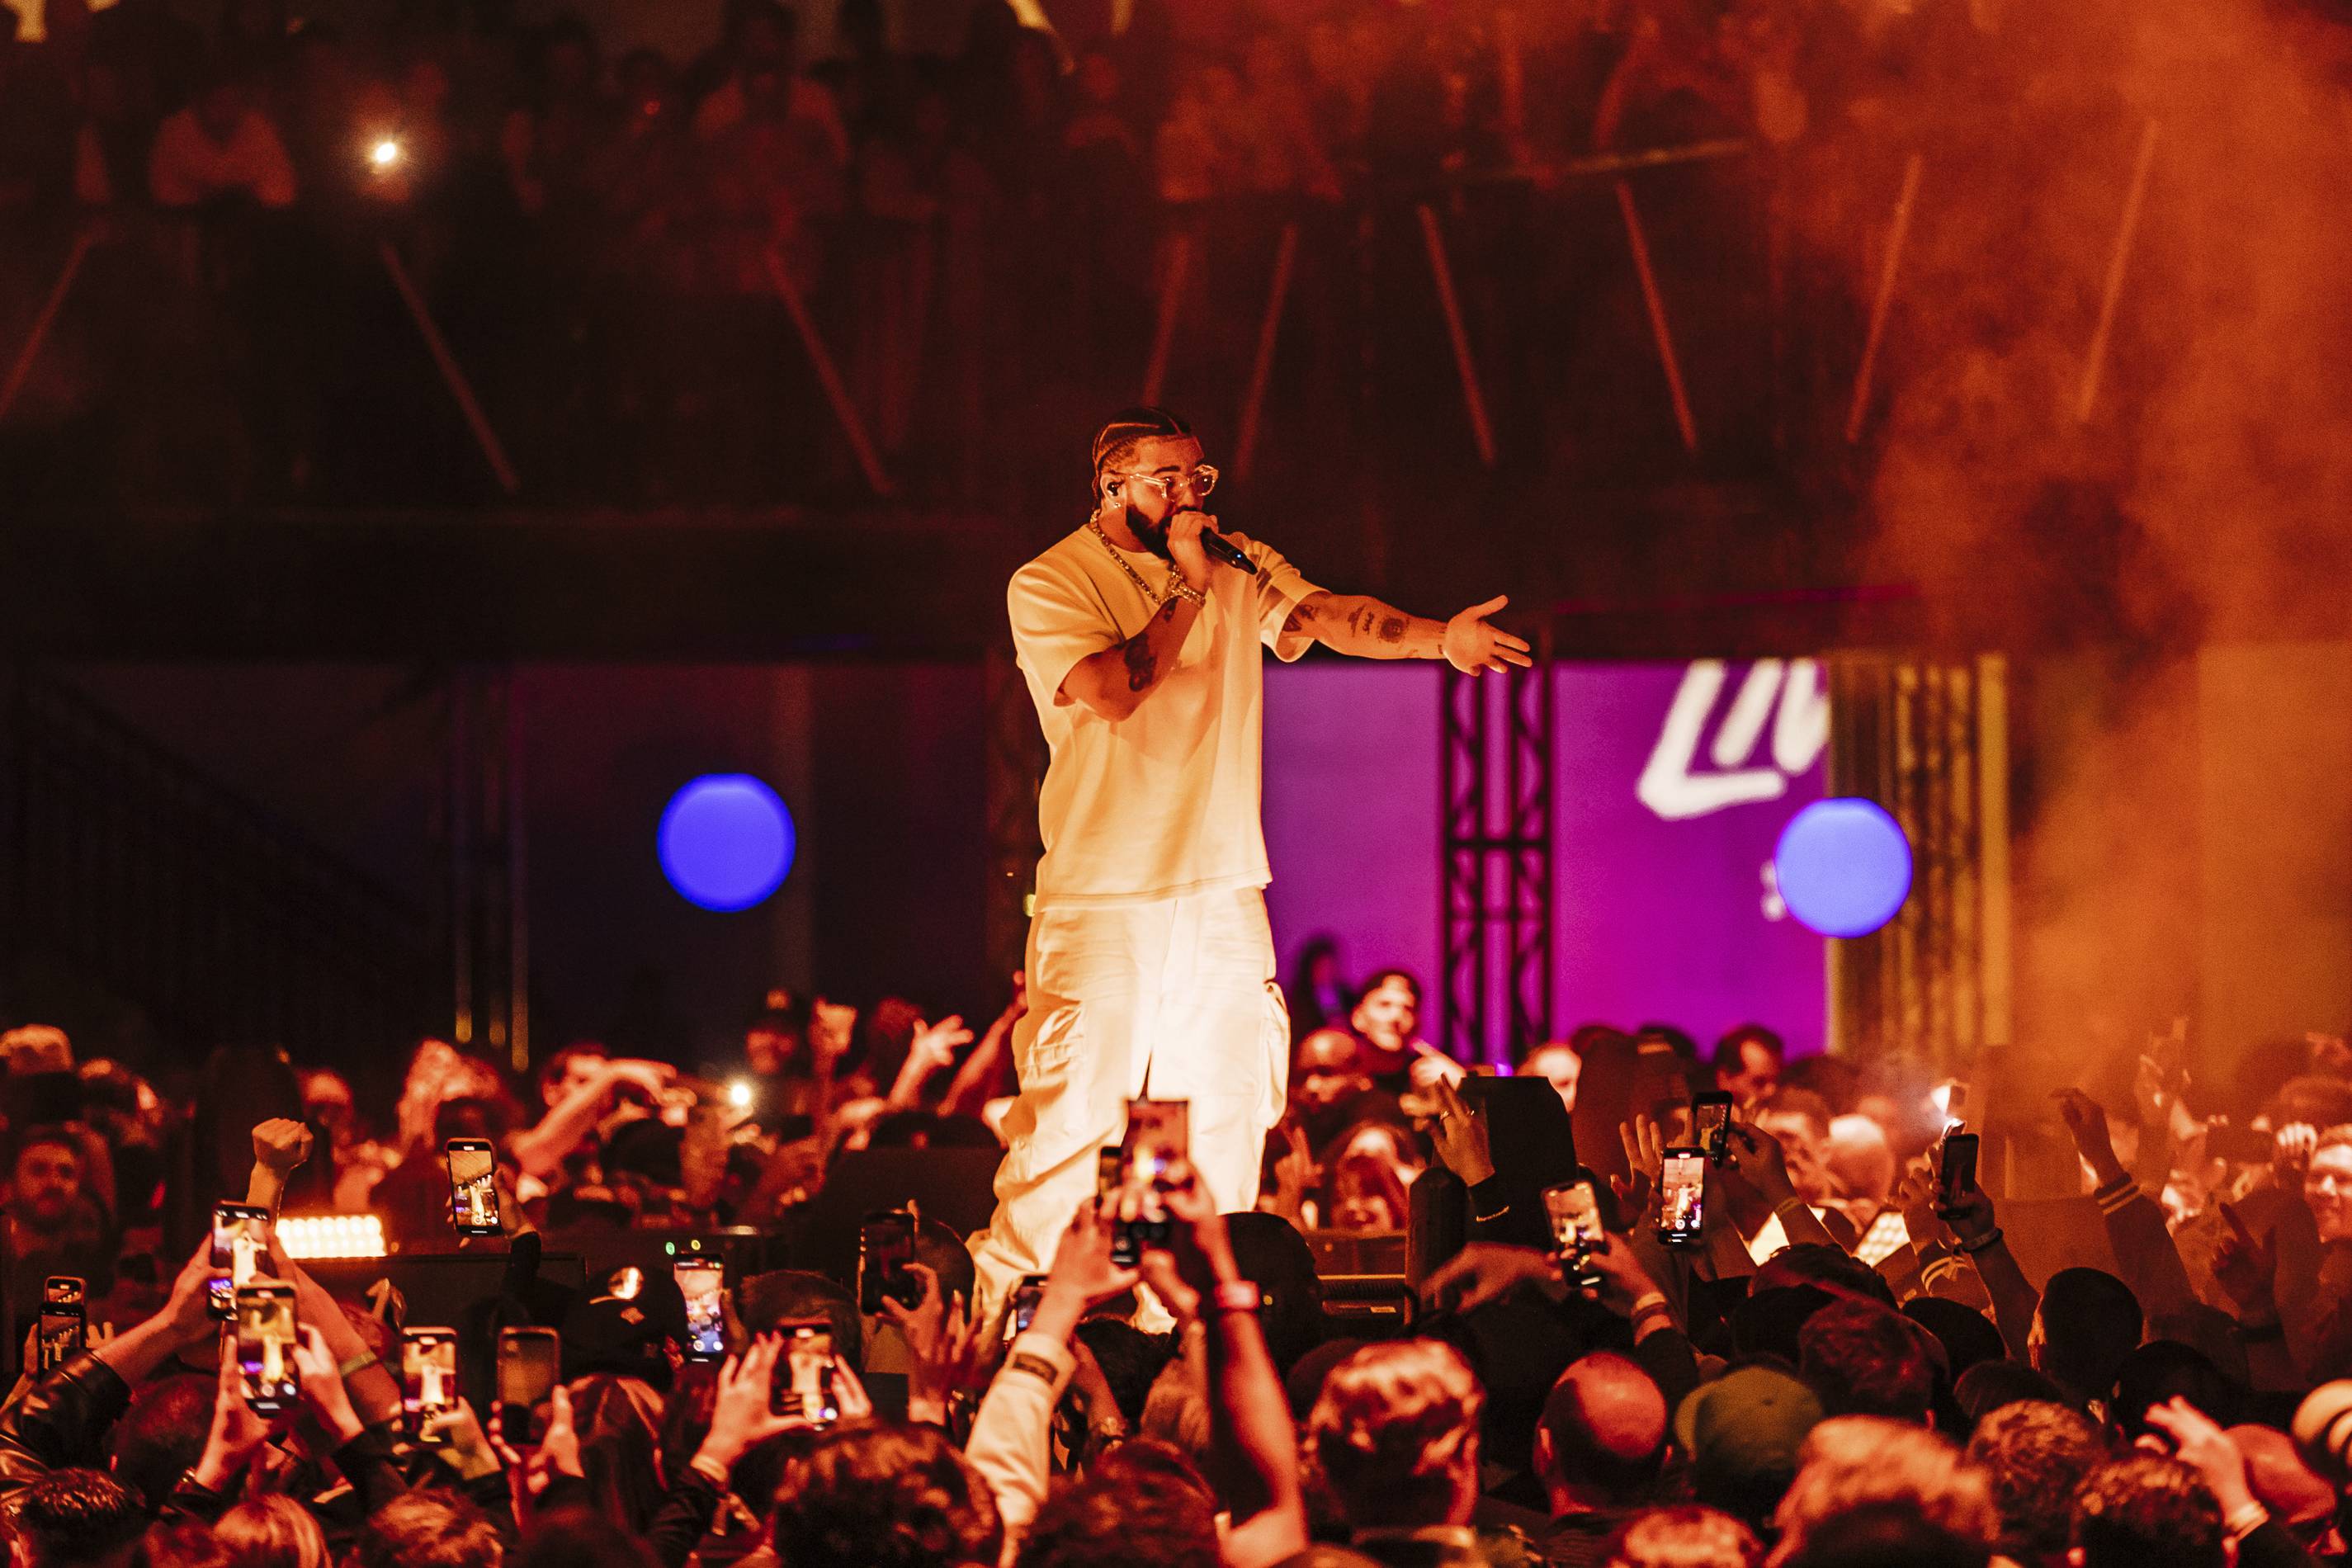 Drake performing at Uncommon Entertainment's Super Bowl 2022 event